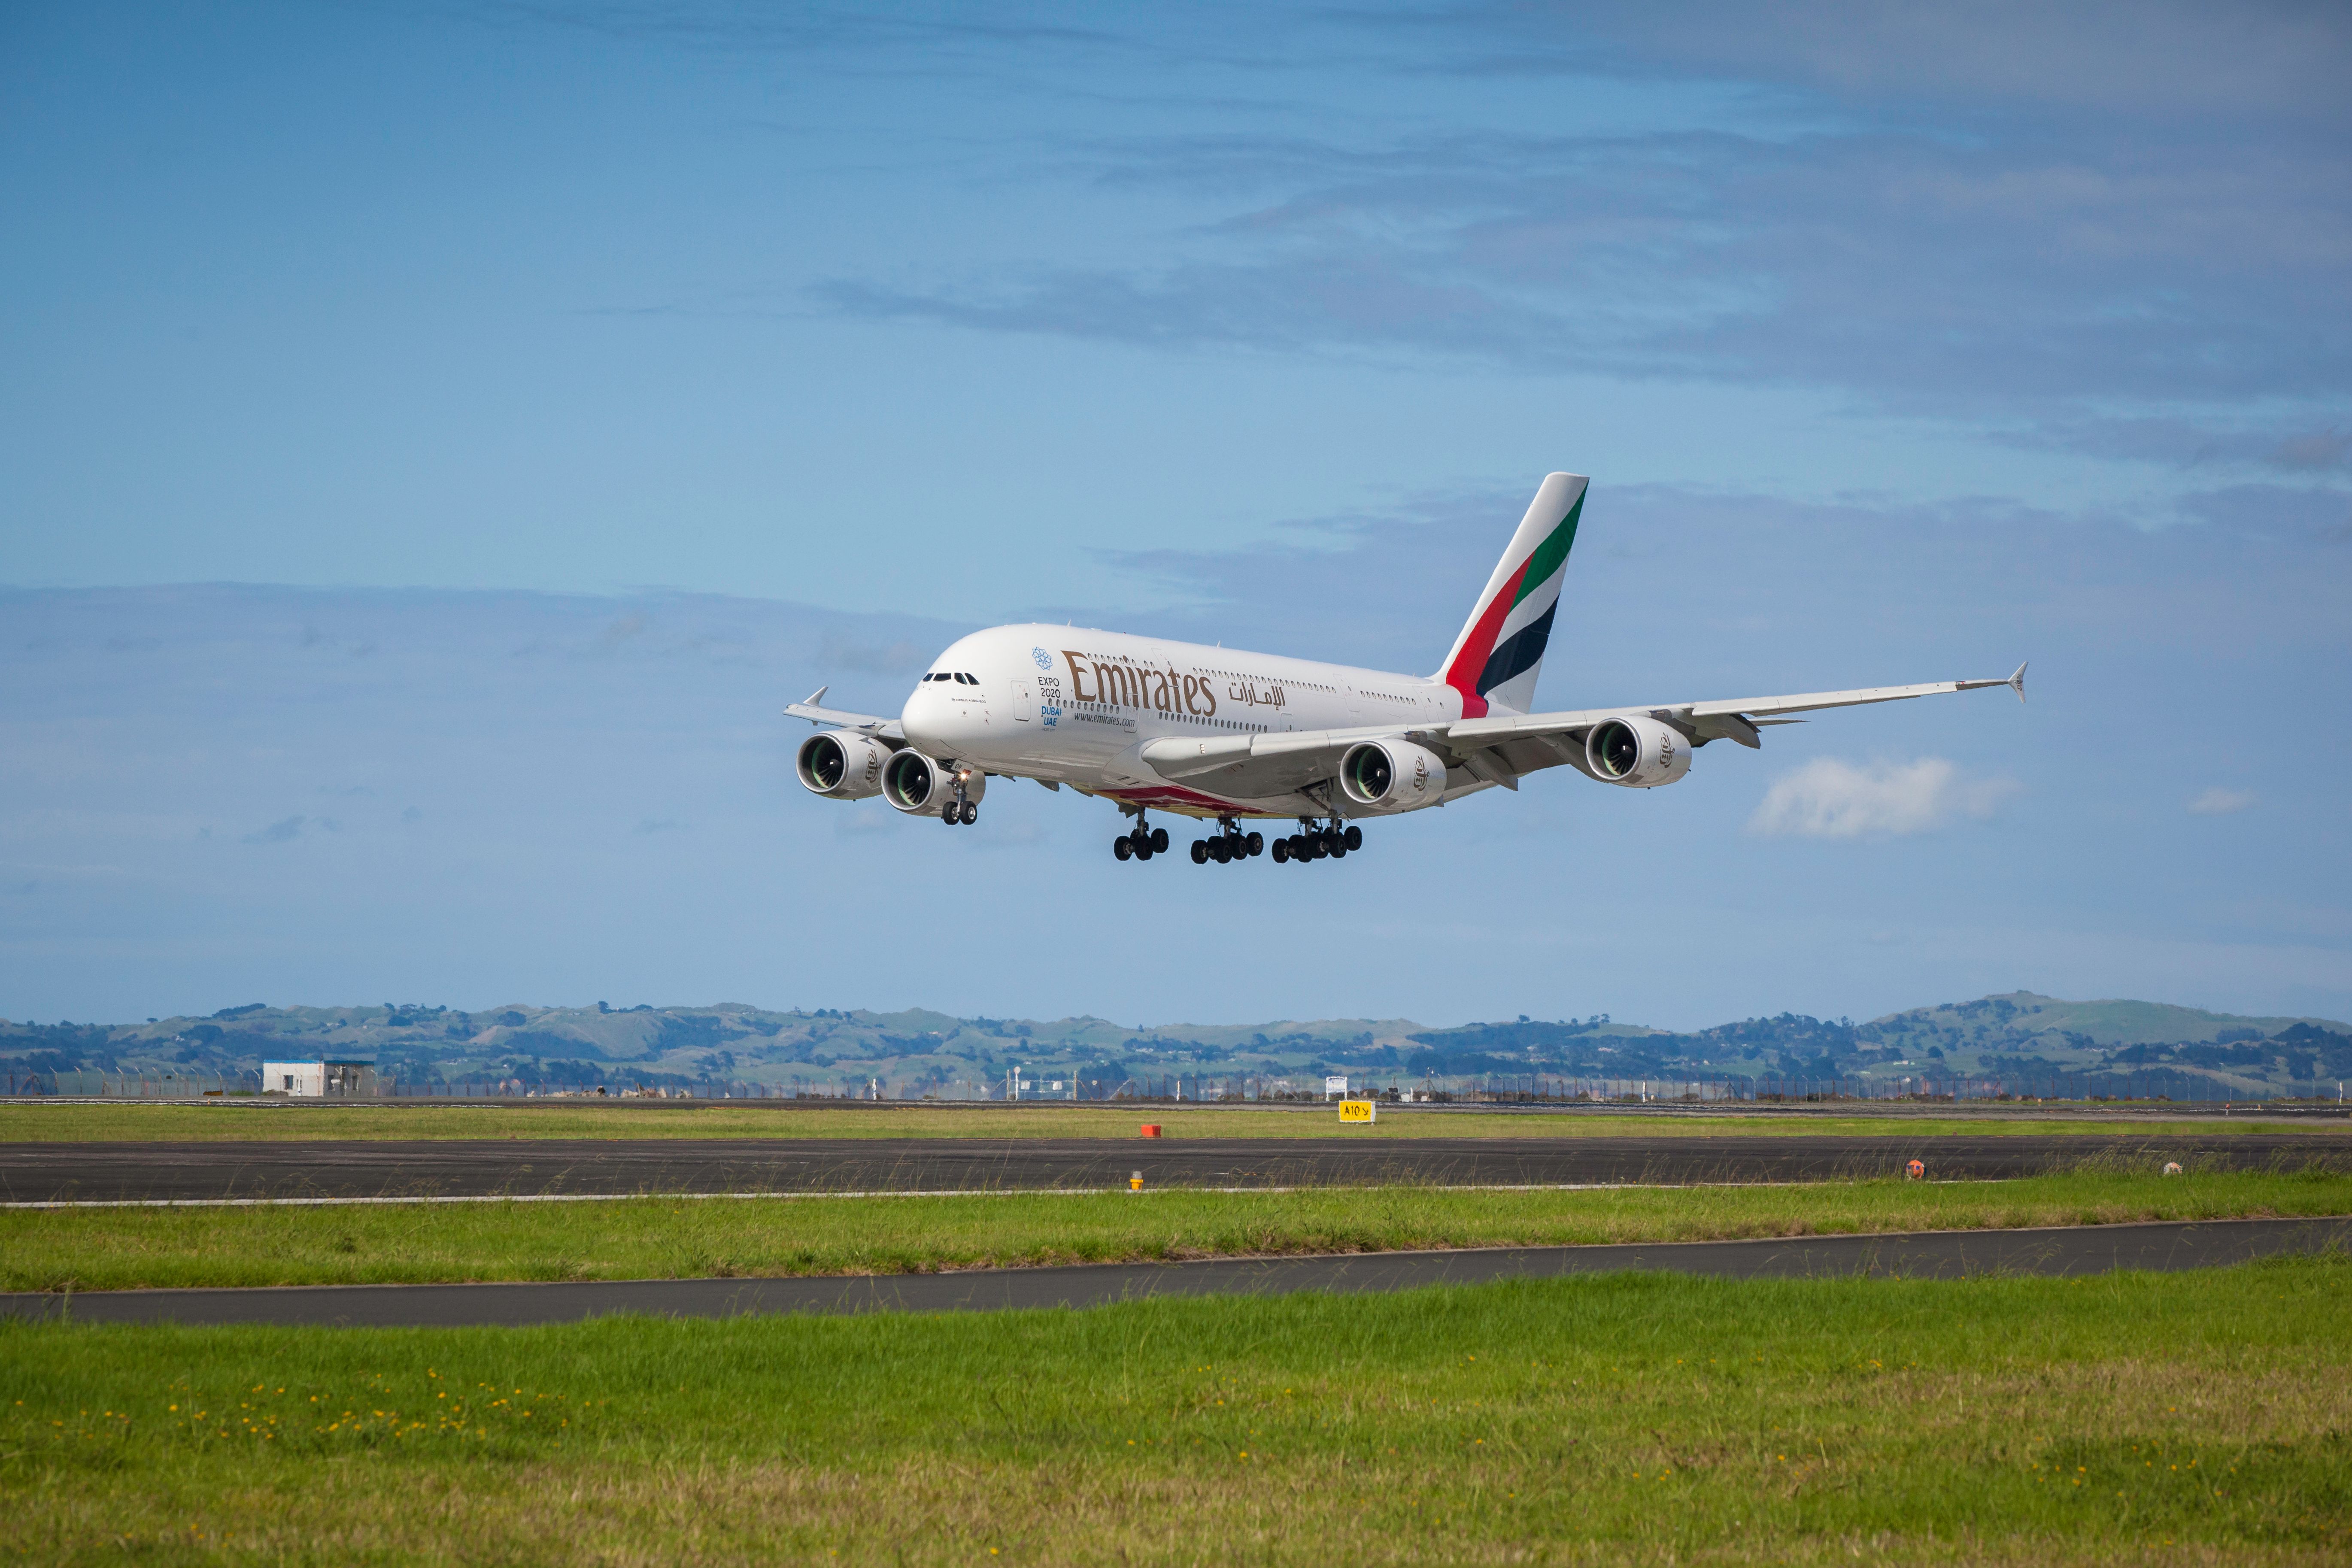 Emirates A380 coming in to land